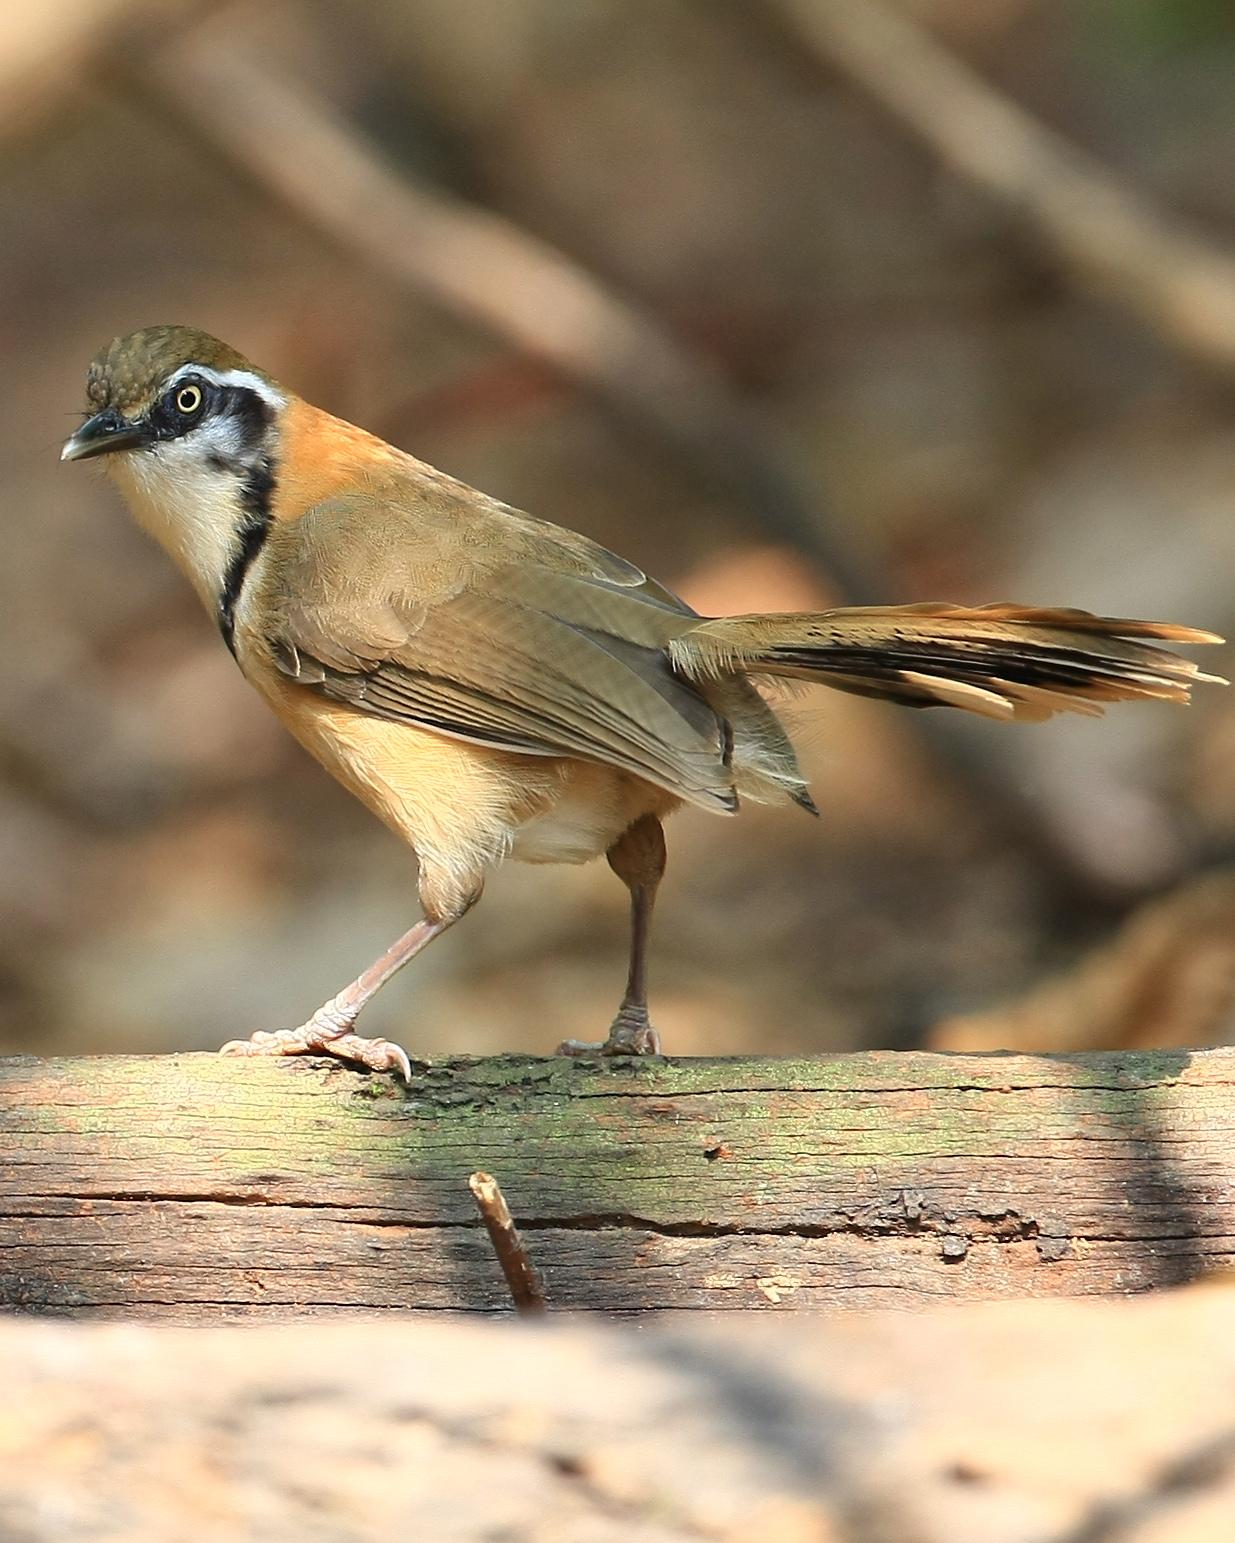 Lesser Necklaced Laughingthrush Photo by Monte Taylor